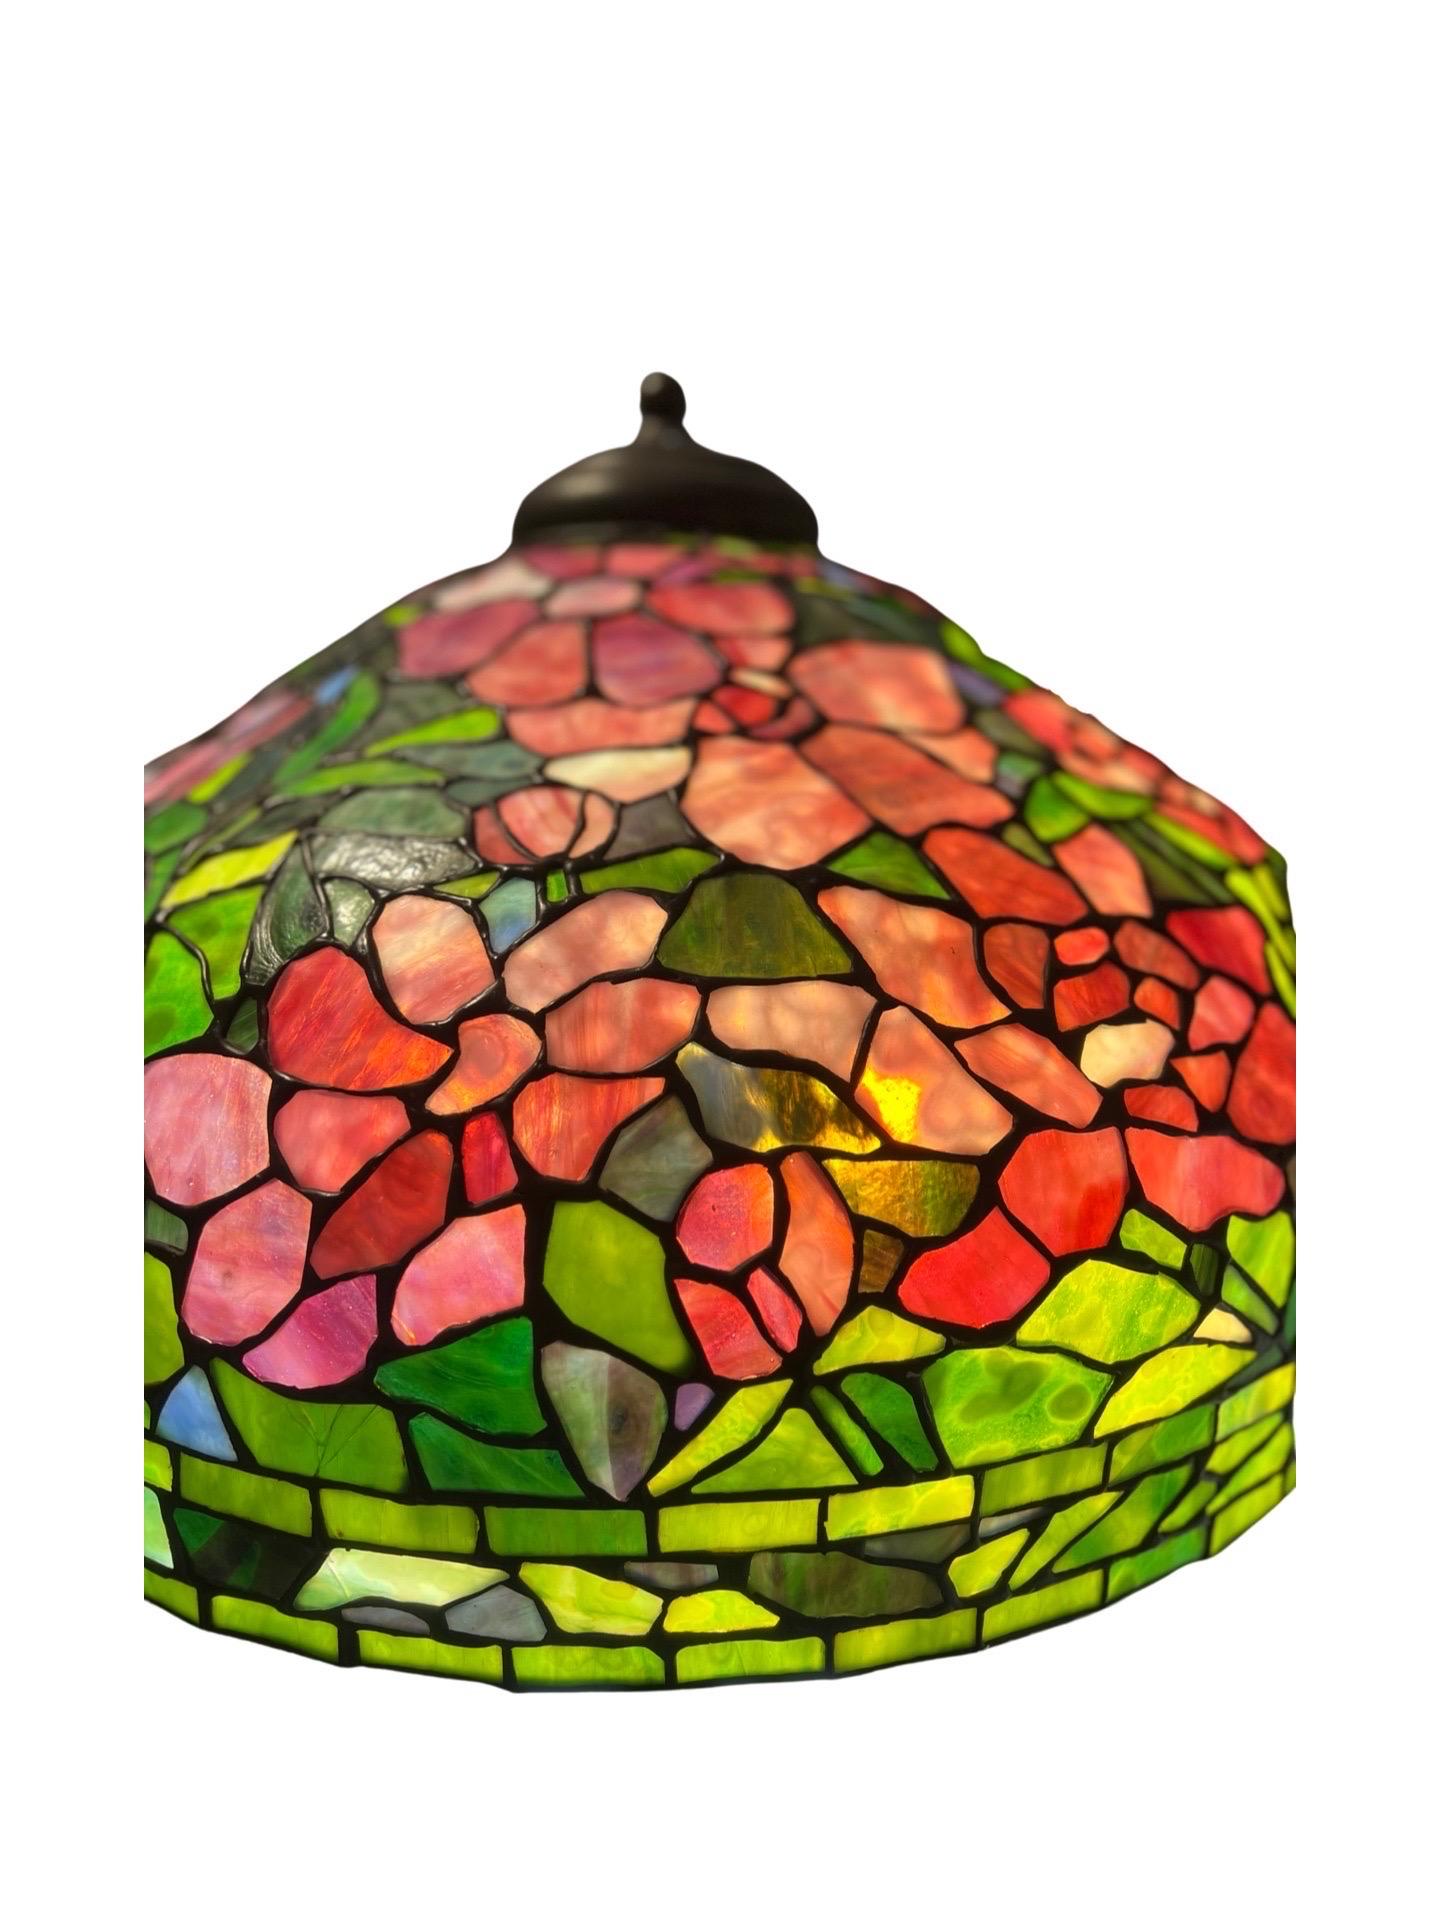 20th Century Unique Art Glass & Metal Company Leaded Glass Peony Table Lamp C. 1915 For Sale